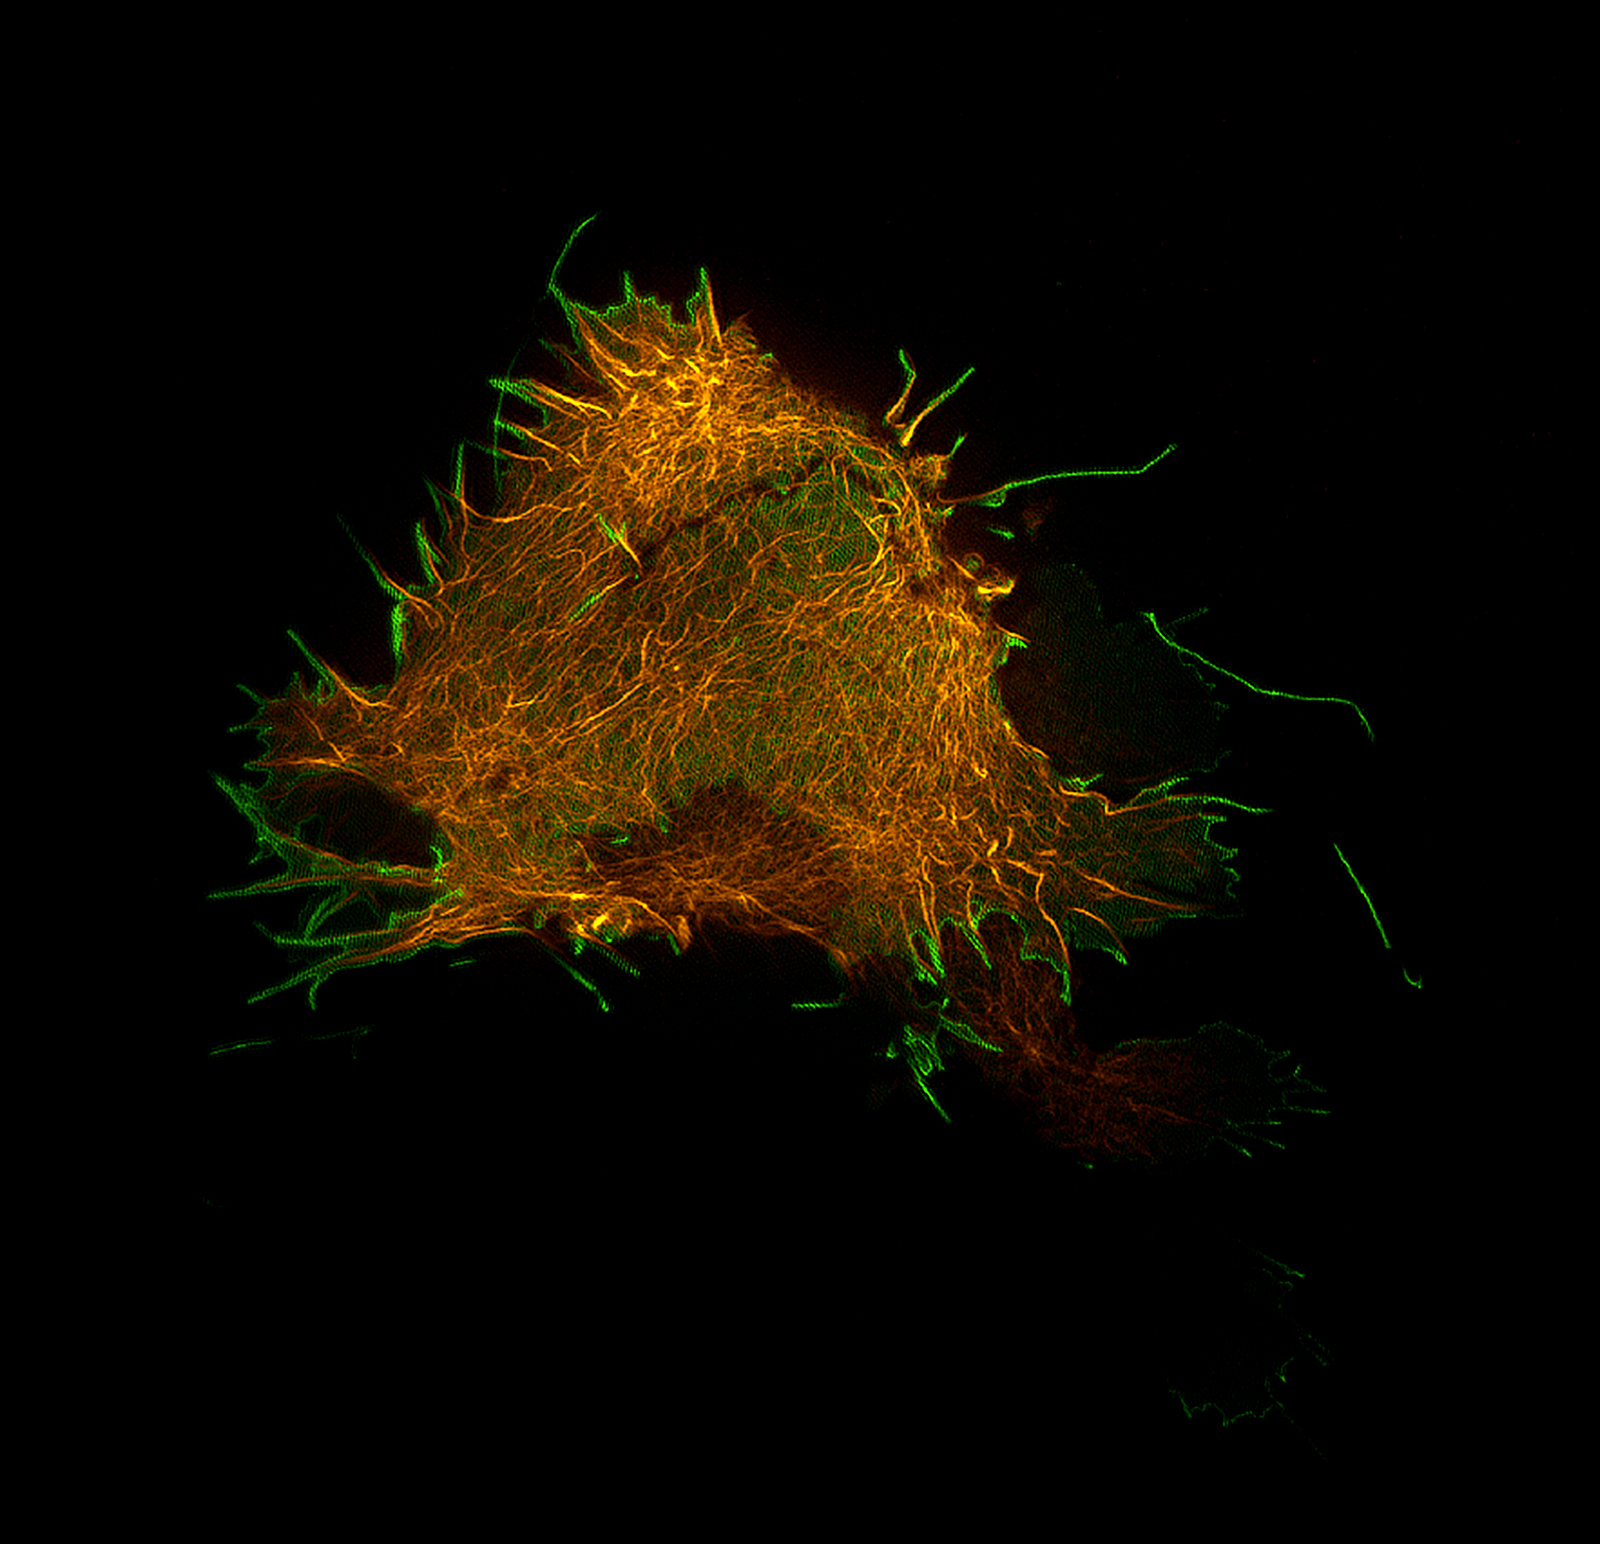 A fluorescent microscopic image of a cell labeled in orange with virus particles emerging from it labeled green.